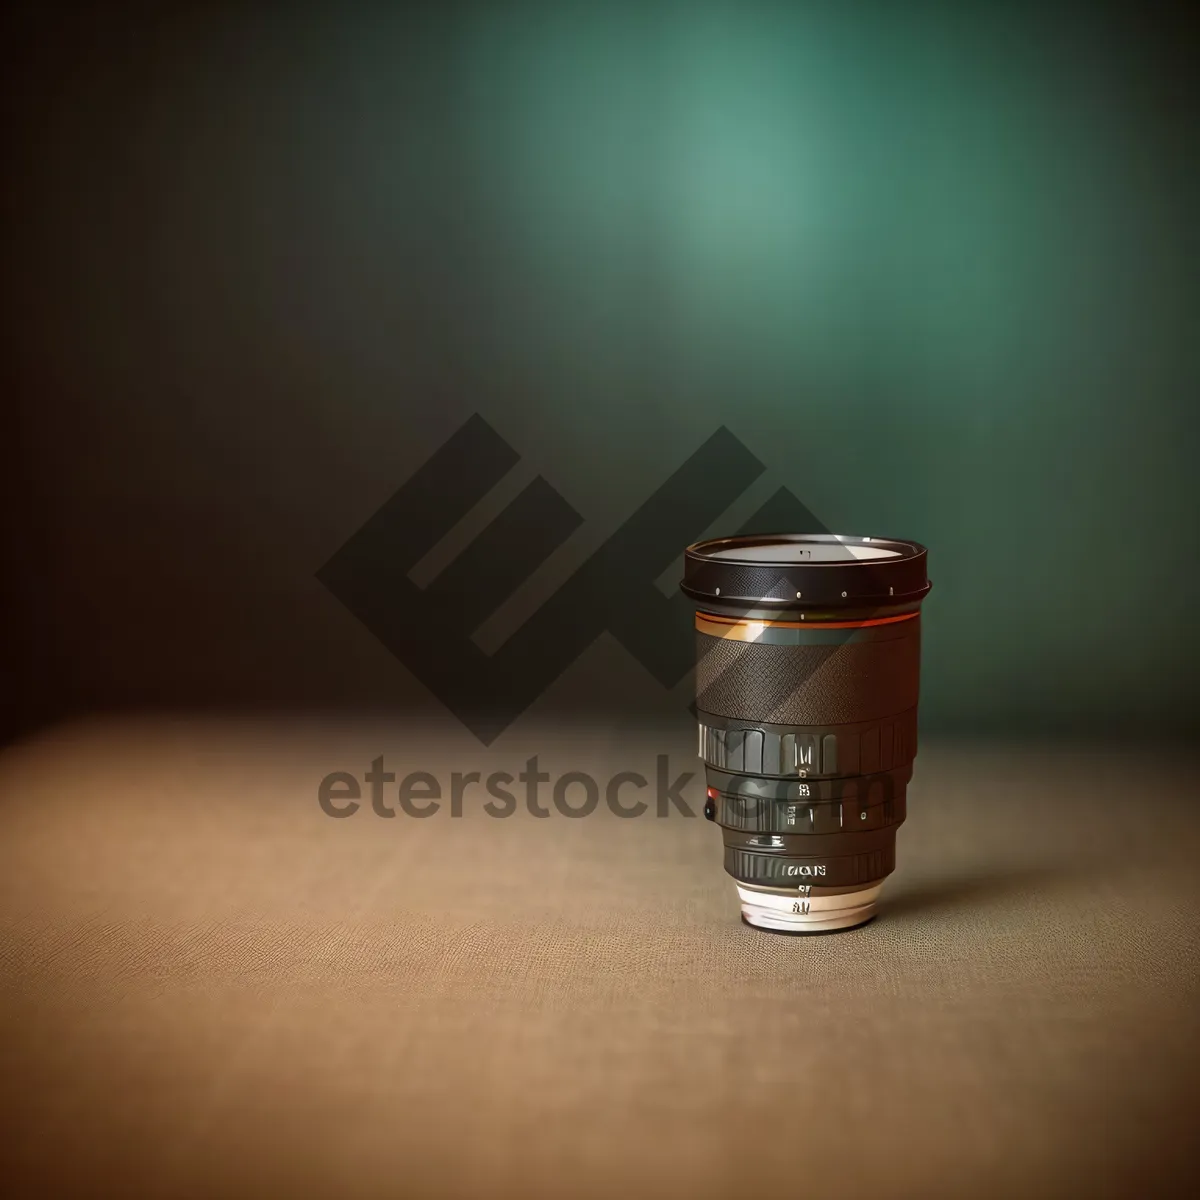 Picture of Electric Film Roll with Vodka Bottle and Lighter